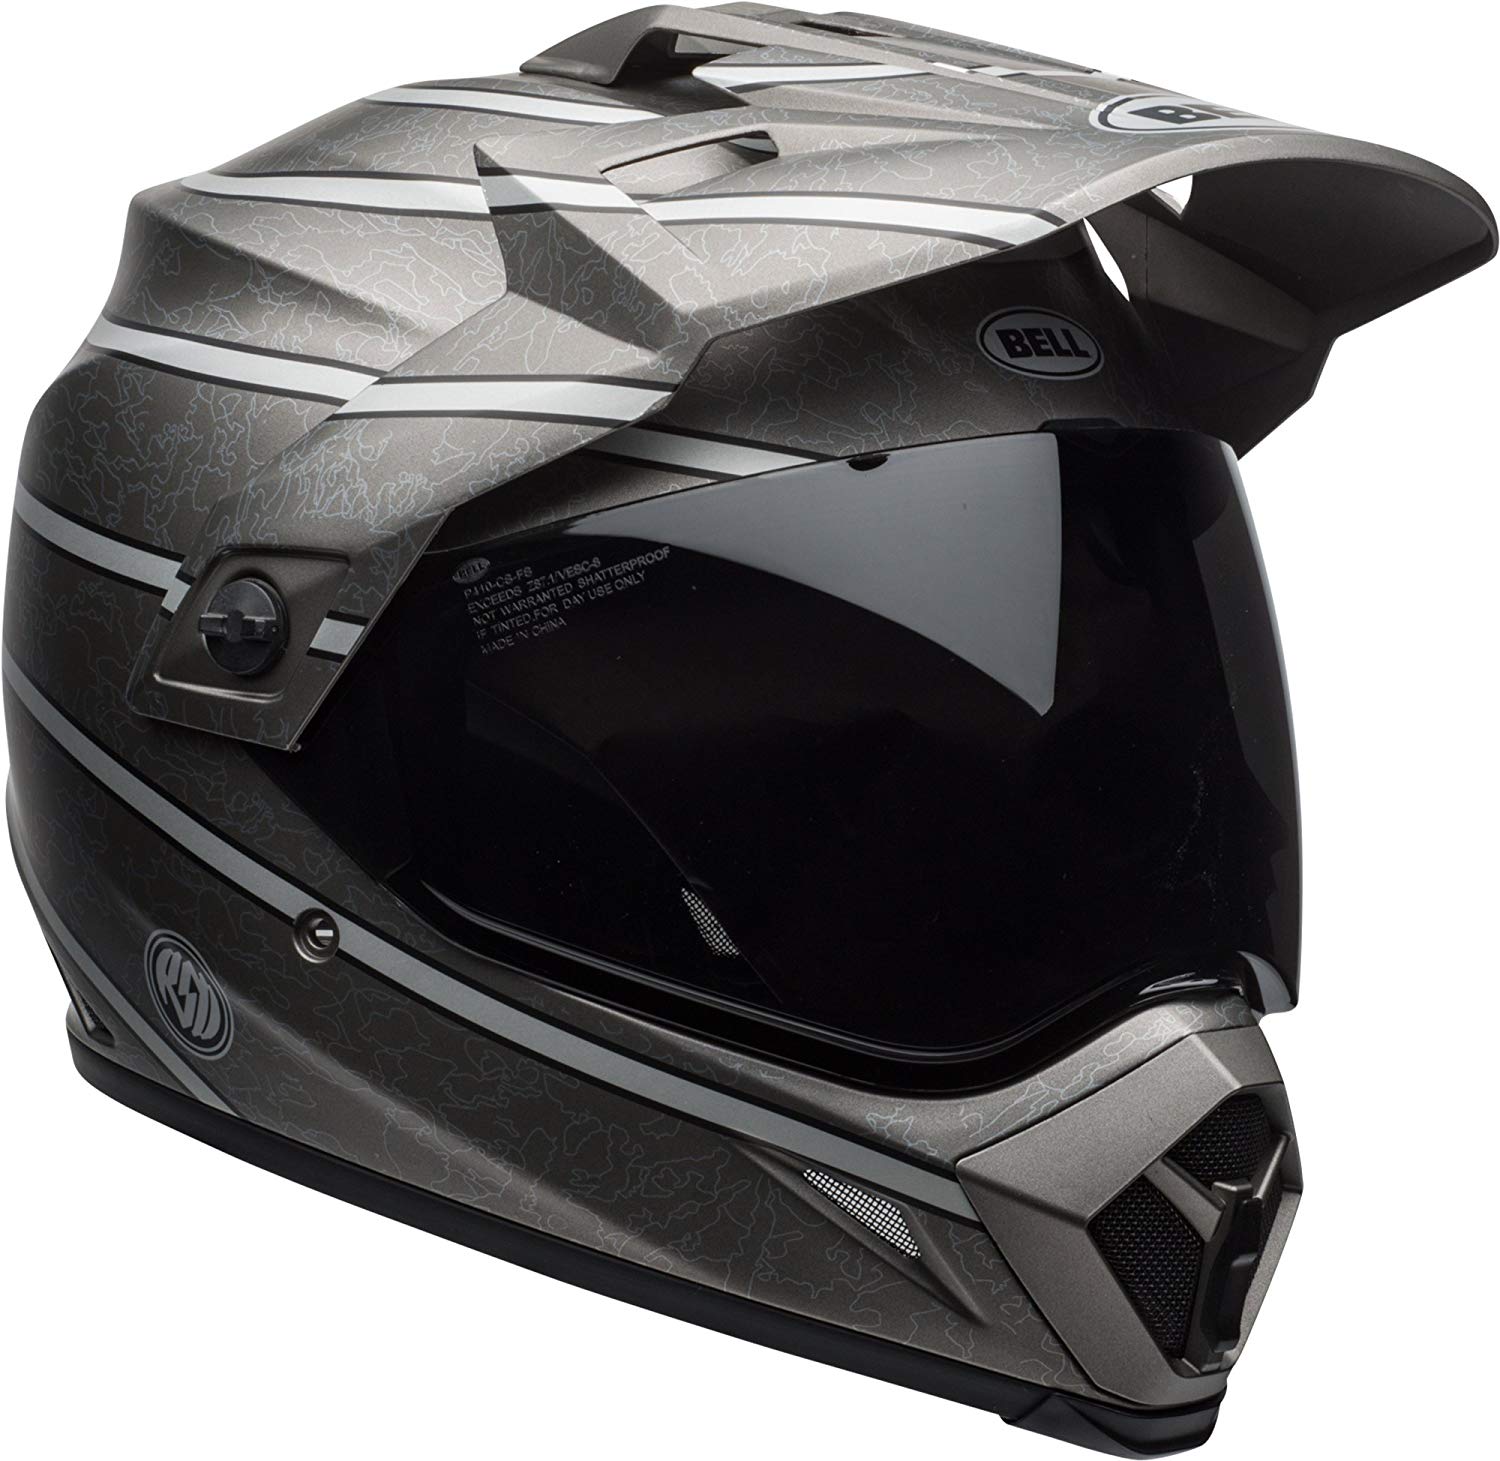 Top 10 Best Motorcycle Helmets For a Stylish Ride - Page 2 of 2 - Top